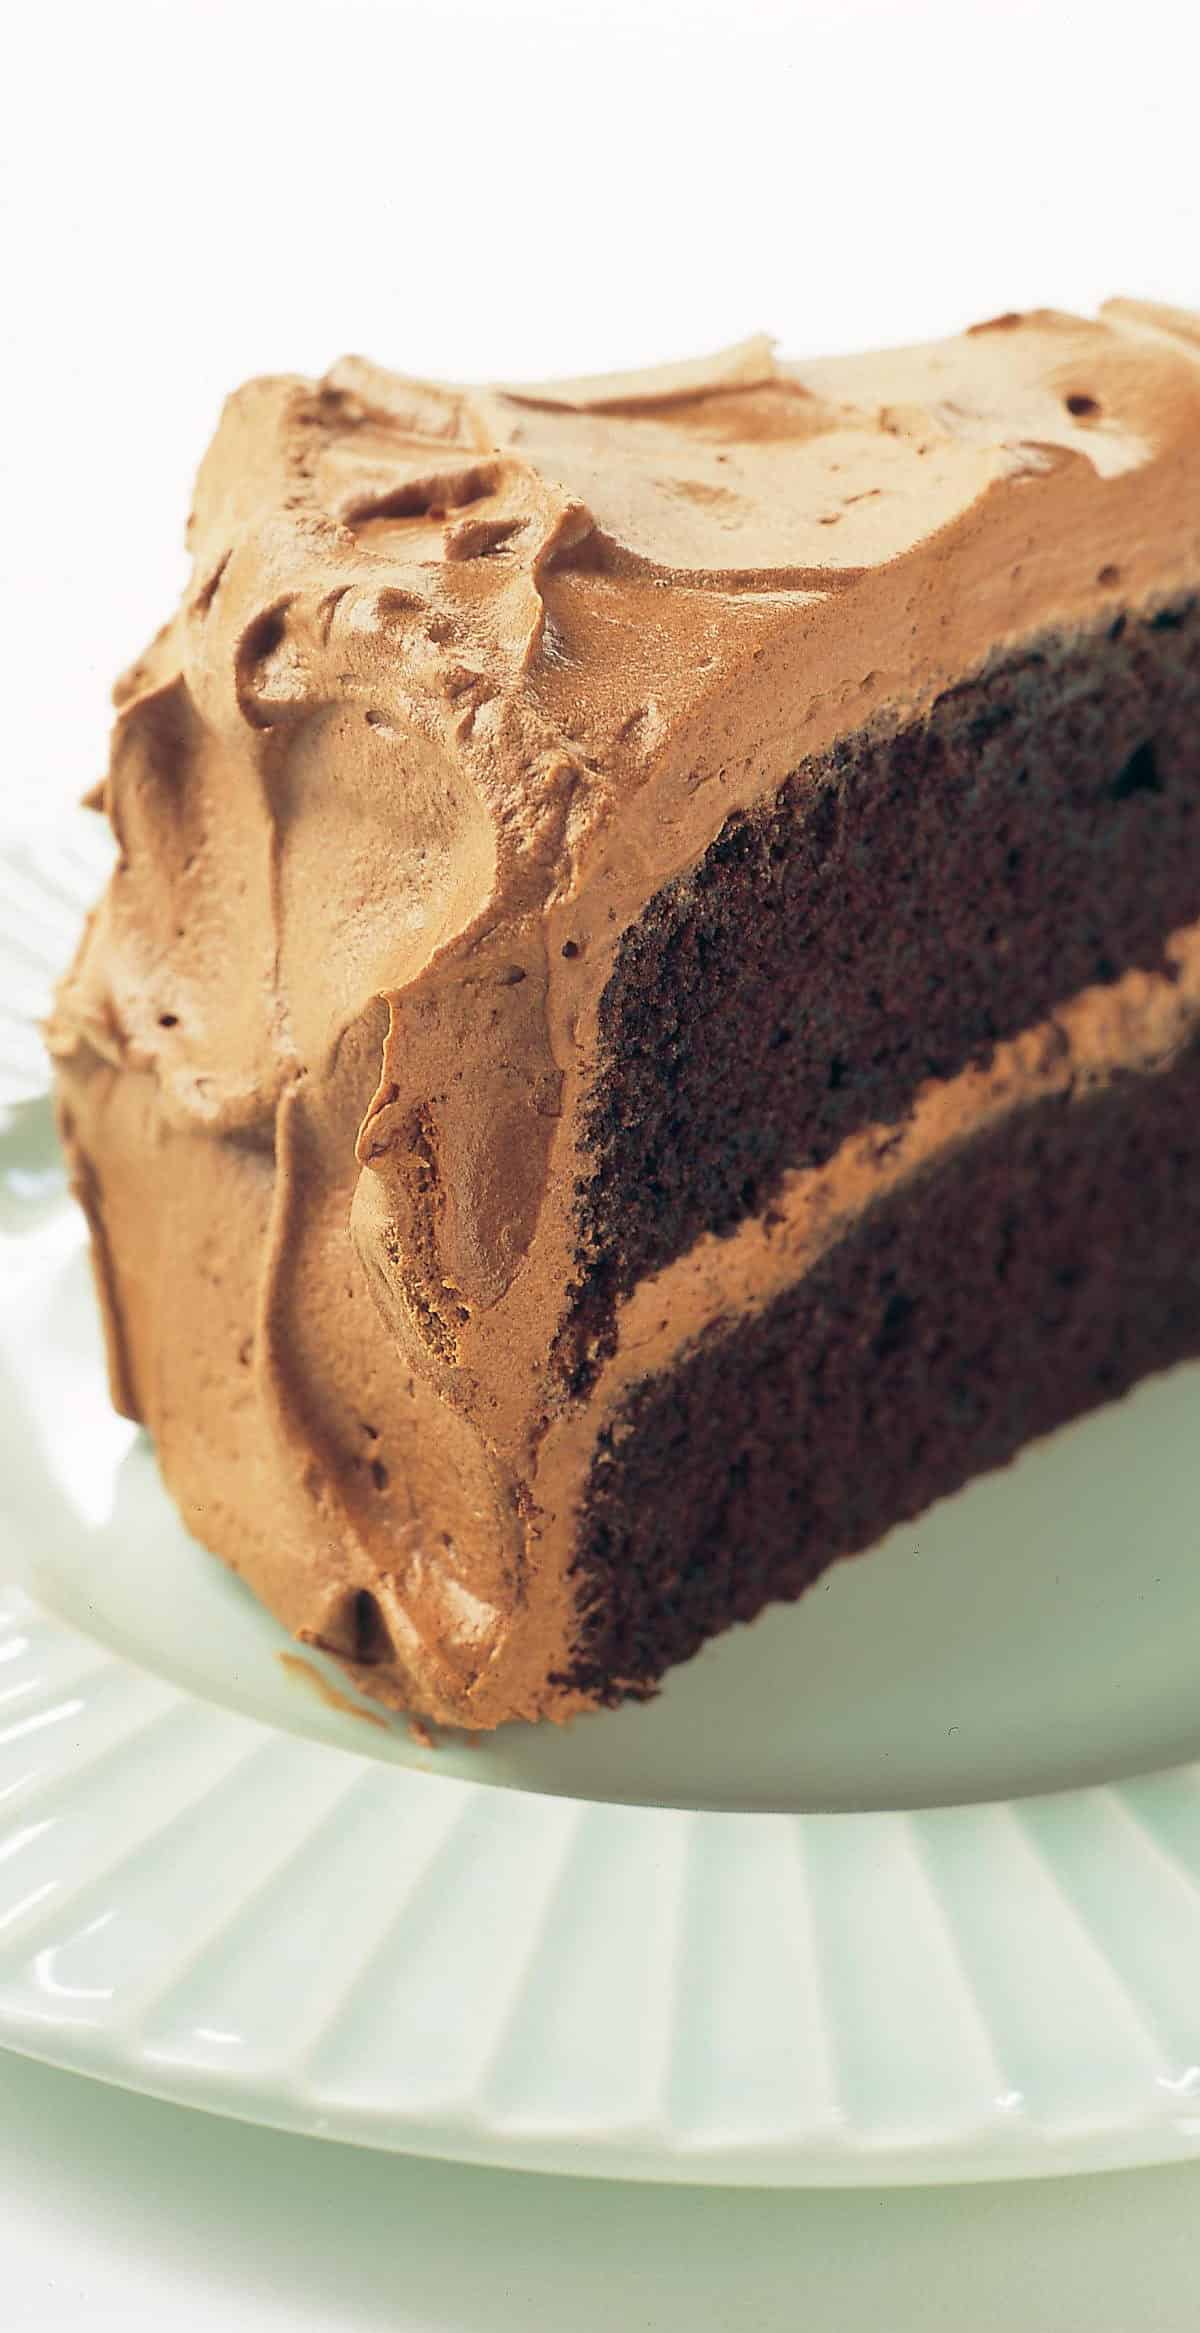  Rich and indulgent, this cake will satisfy any chocolate craving.